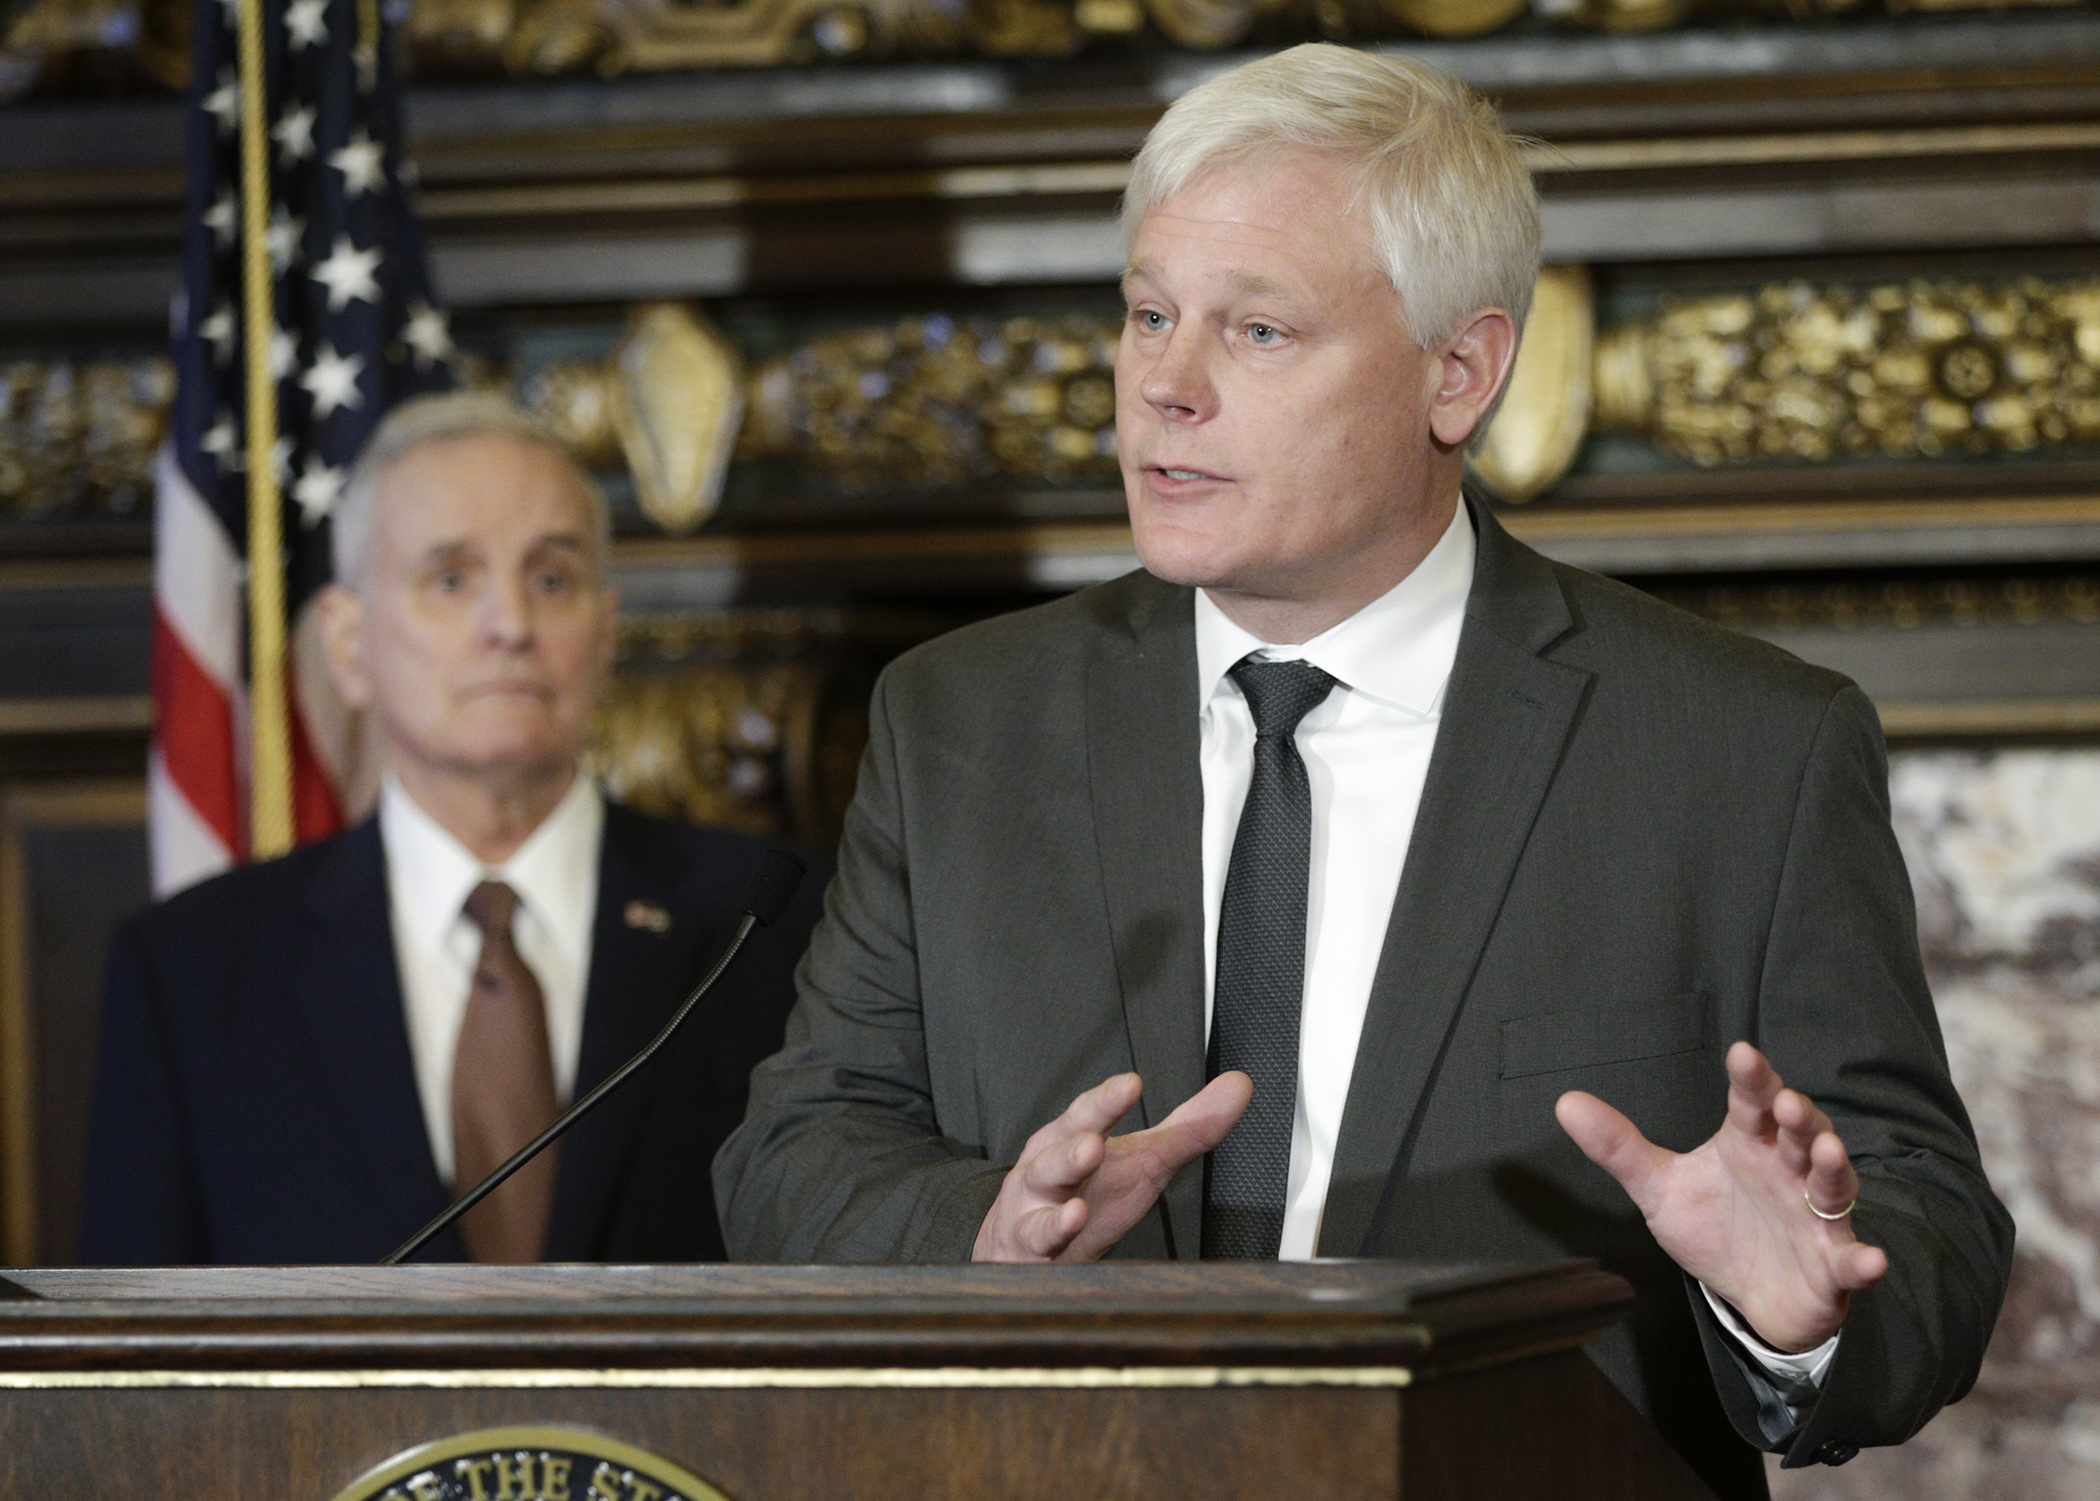 Rep. Paul Thissen answers a question regarding his appointment by Gov. Mark Dayton, left, to the Minnesota Supreme Court. Thissen replaces Justice David Stras who was appointed to the Eighth Circuit Court of Appeals. Photo by Paul Battaglia